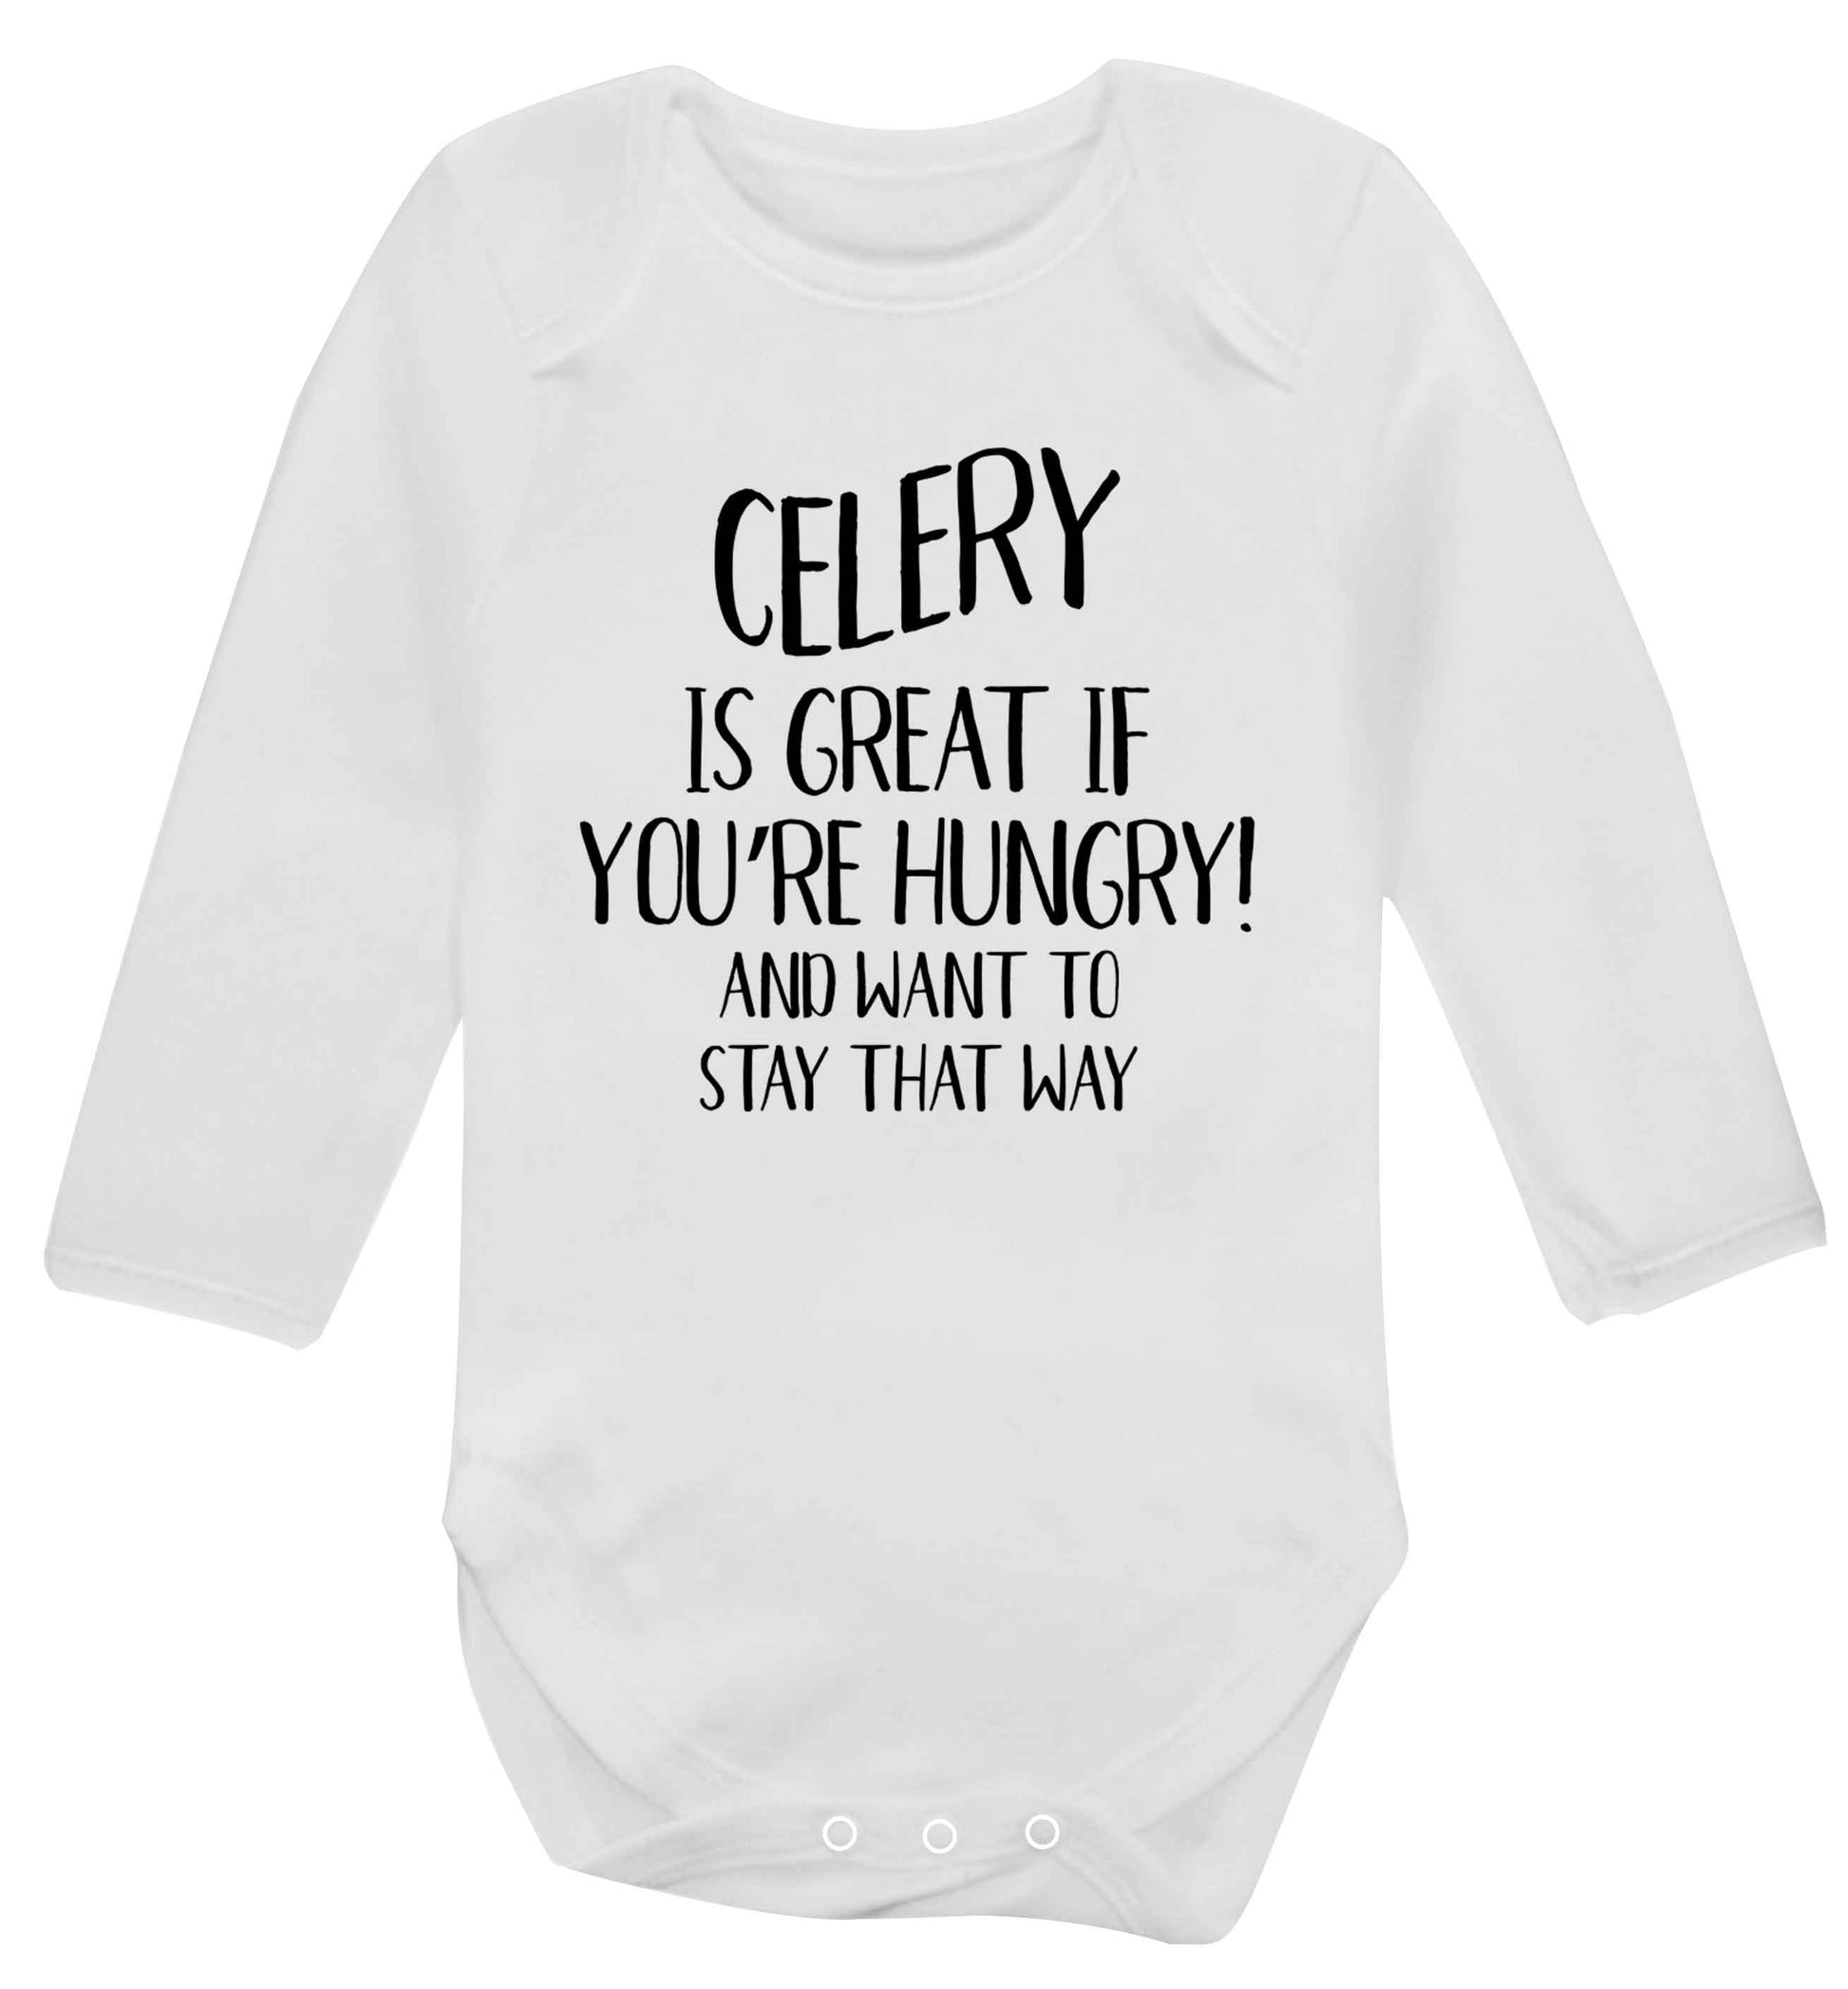 Cellery is great when you're hungry and want to stay that way Baby Vest long sleeved white 6-12 months